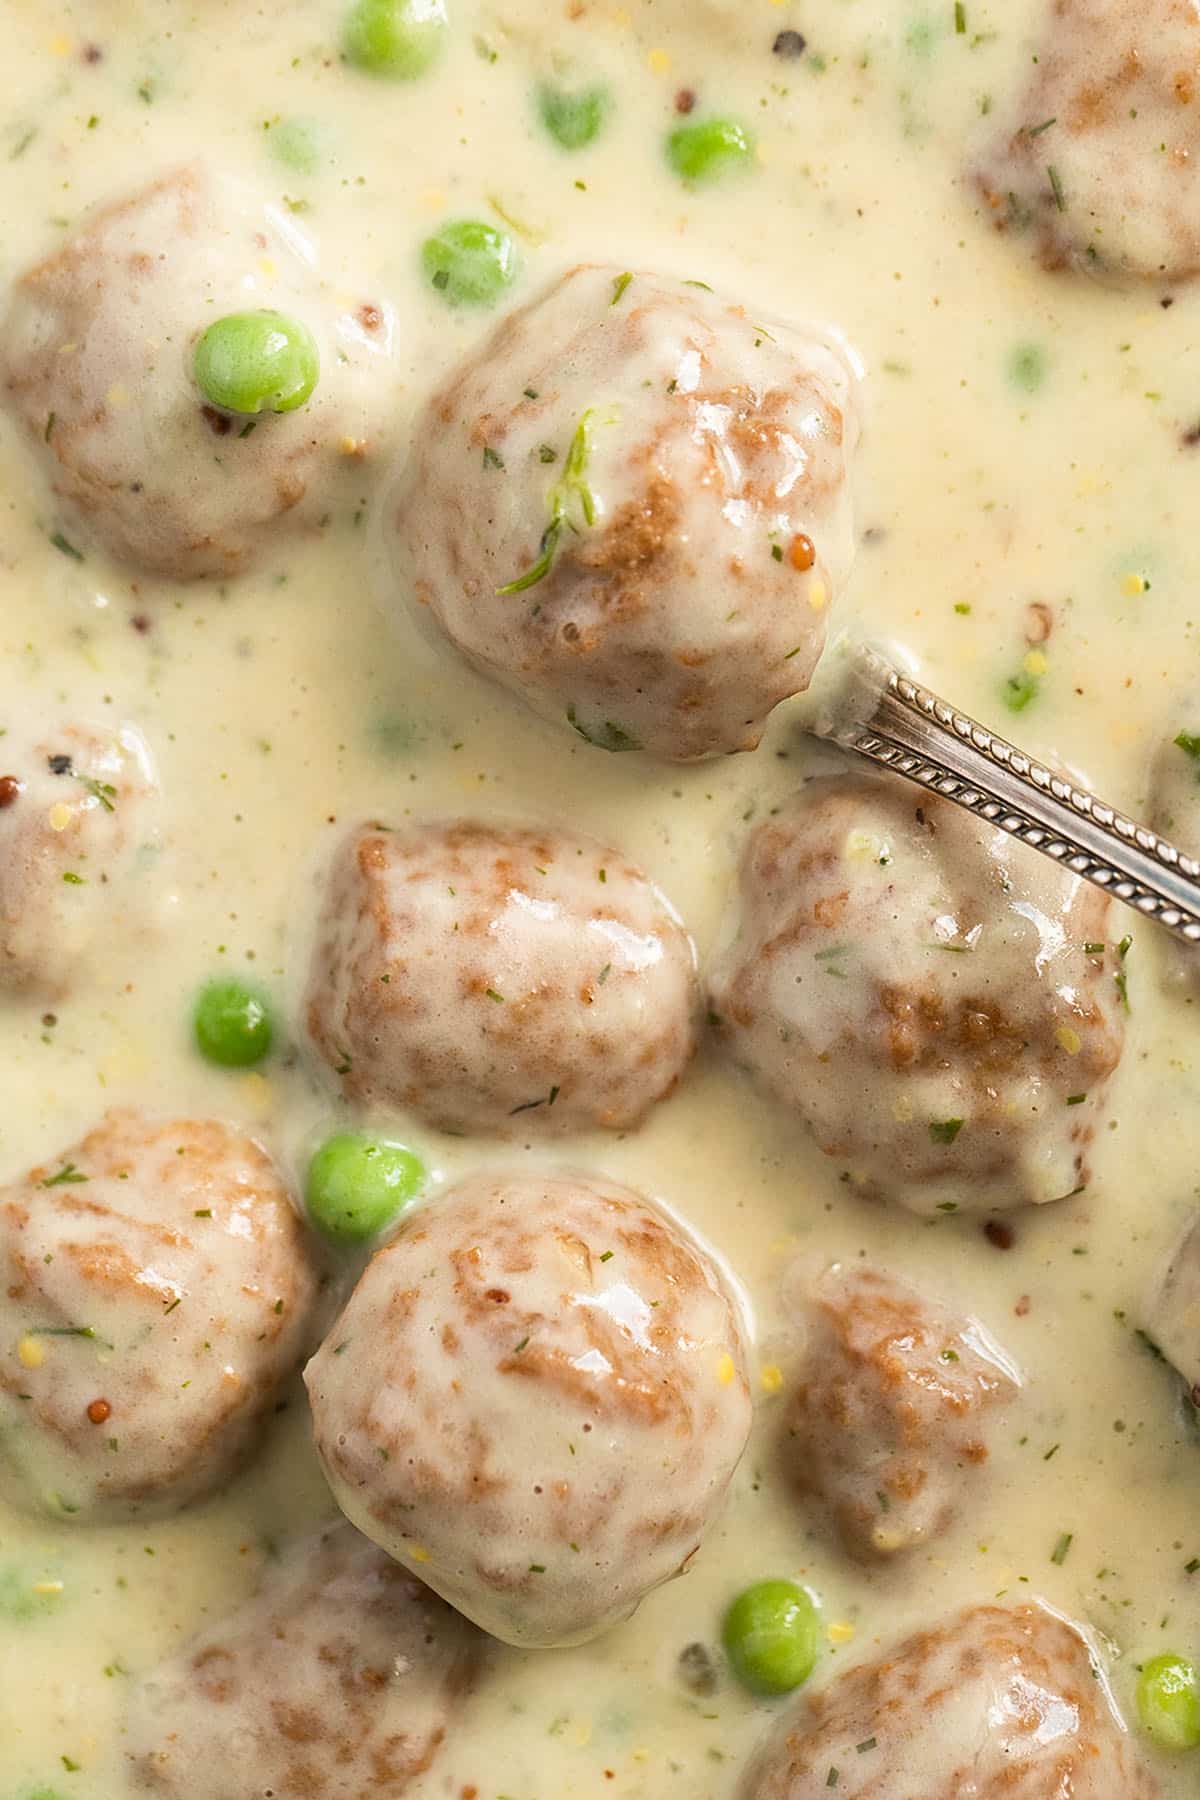 meatballs in swedish sauce with peas, a spoon lifting one meatball.